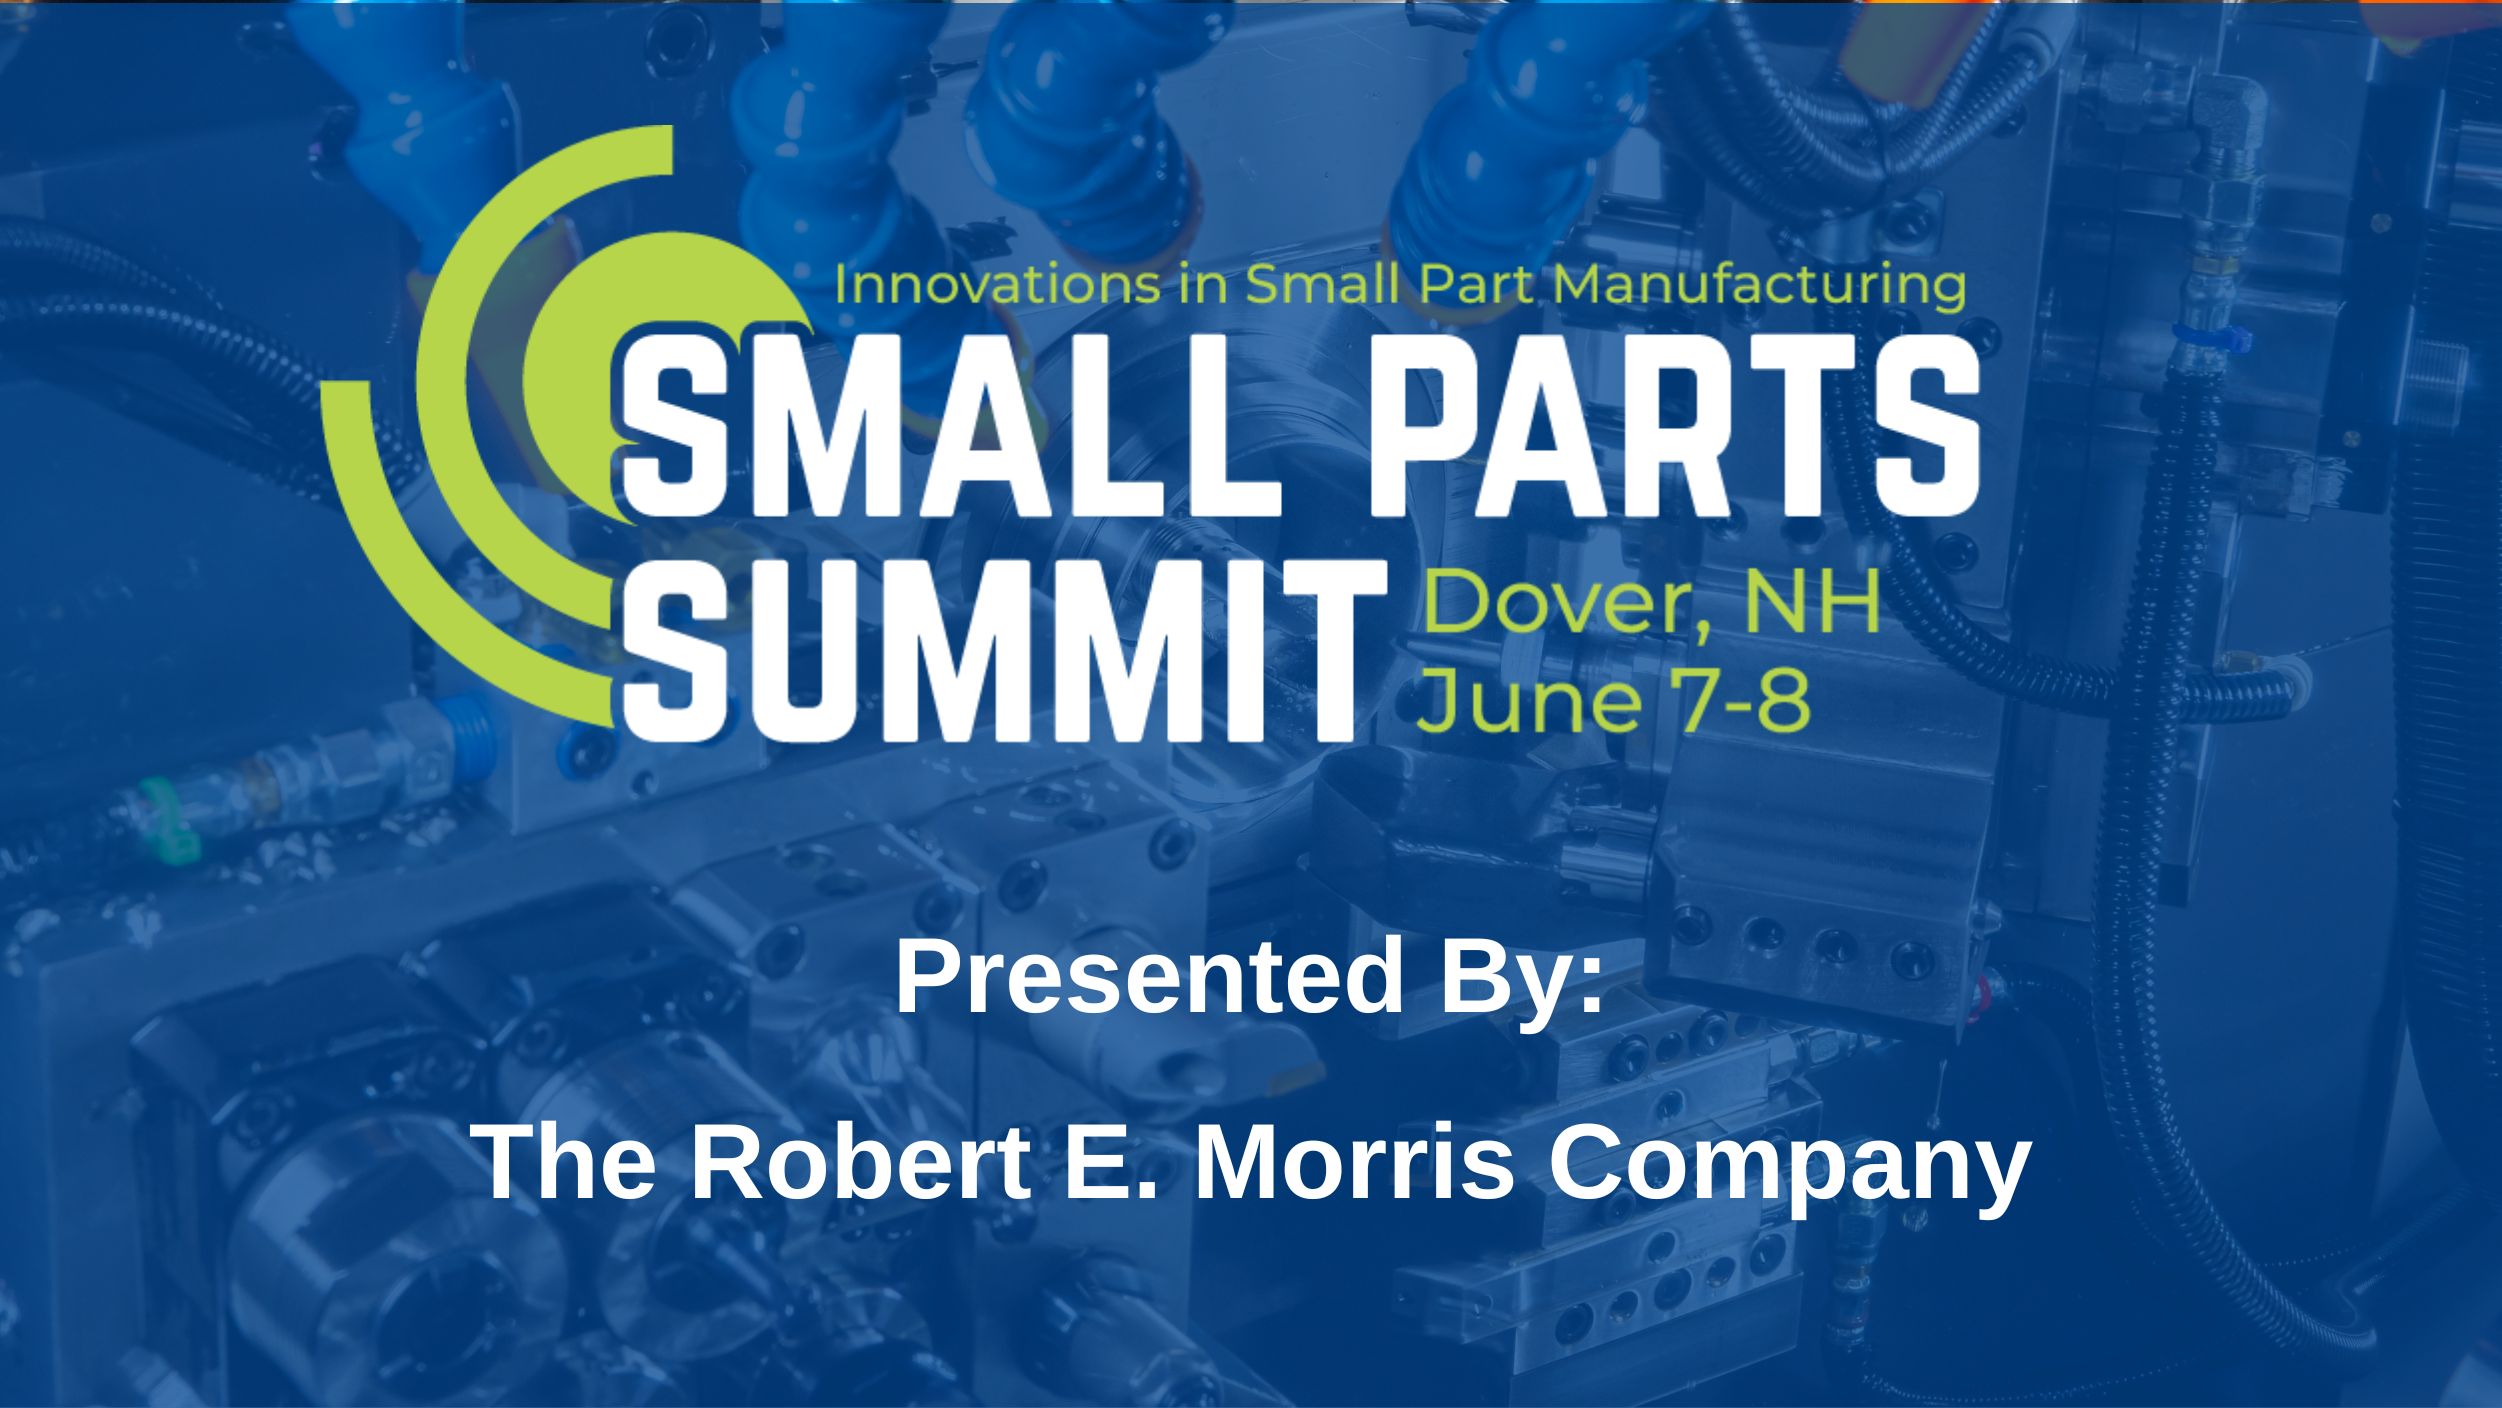 Transform your small part manufacturing with precision and innovation at the Small Part Summit in Dover, NH